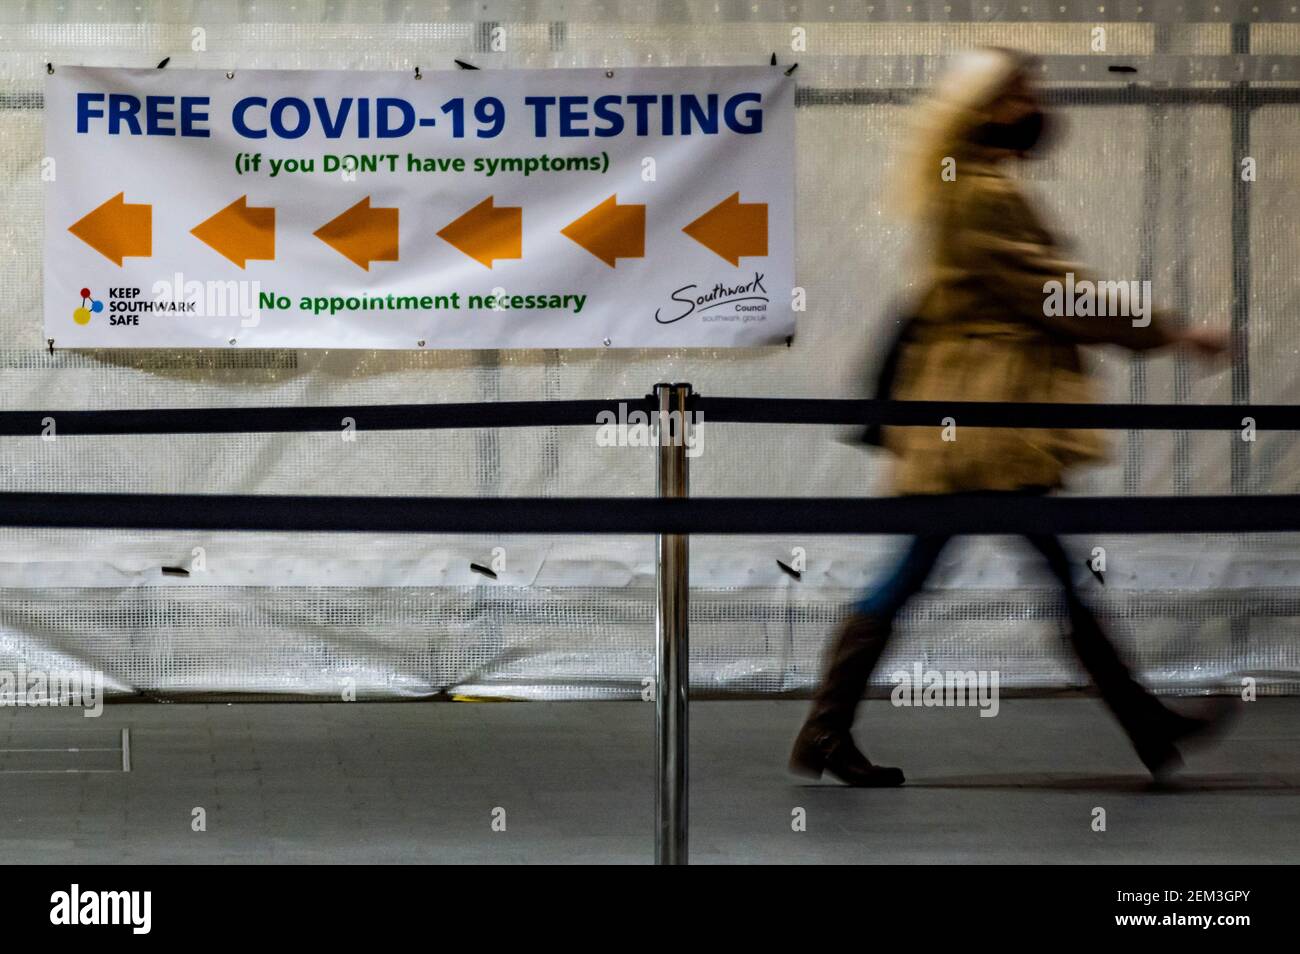 London, UK. 23rd Feb, 2021. A sign offers free covid-19 testing thanks to Southwark Council - London Bridge Station is fairly quiet during the current national Lockdown. Most travellers wear masks as they are mandatory. Credit: Guy Bell/Alamy Live News Stock Photo